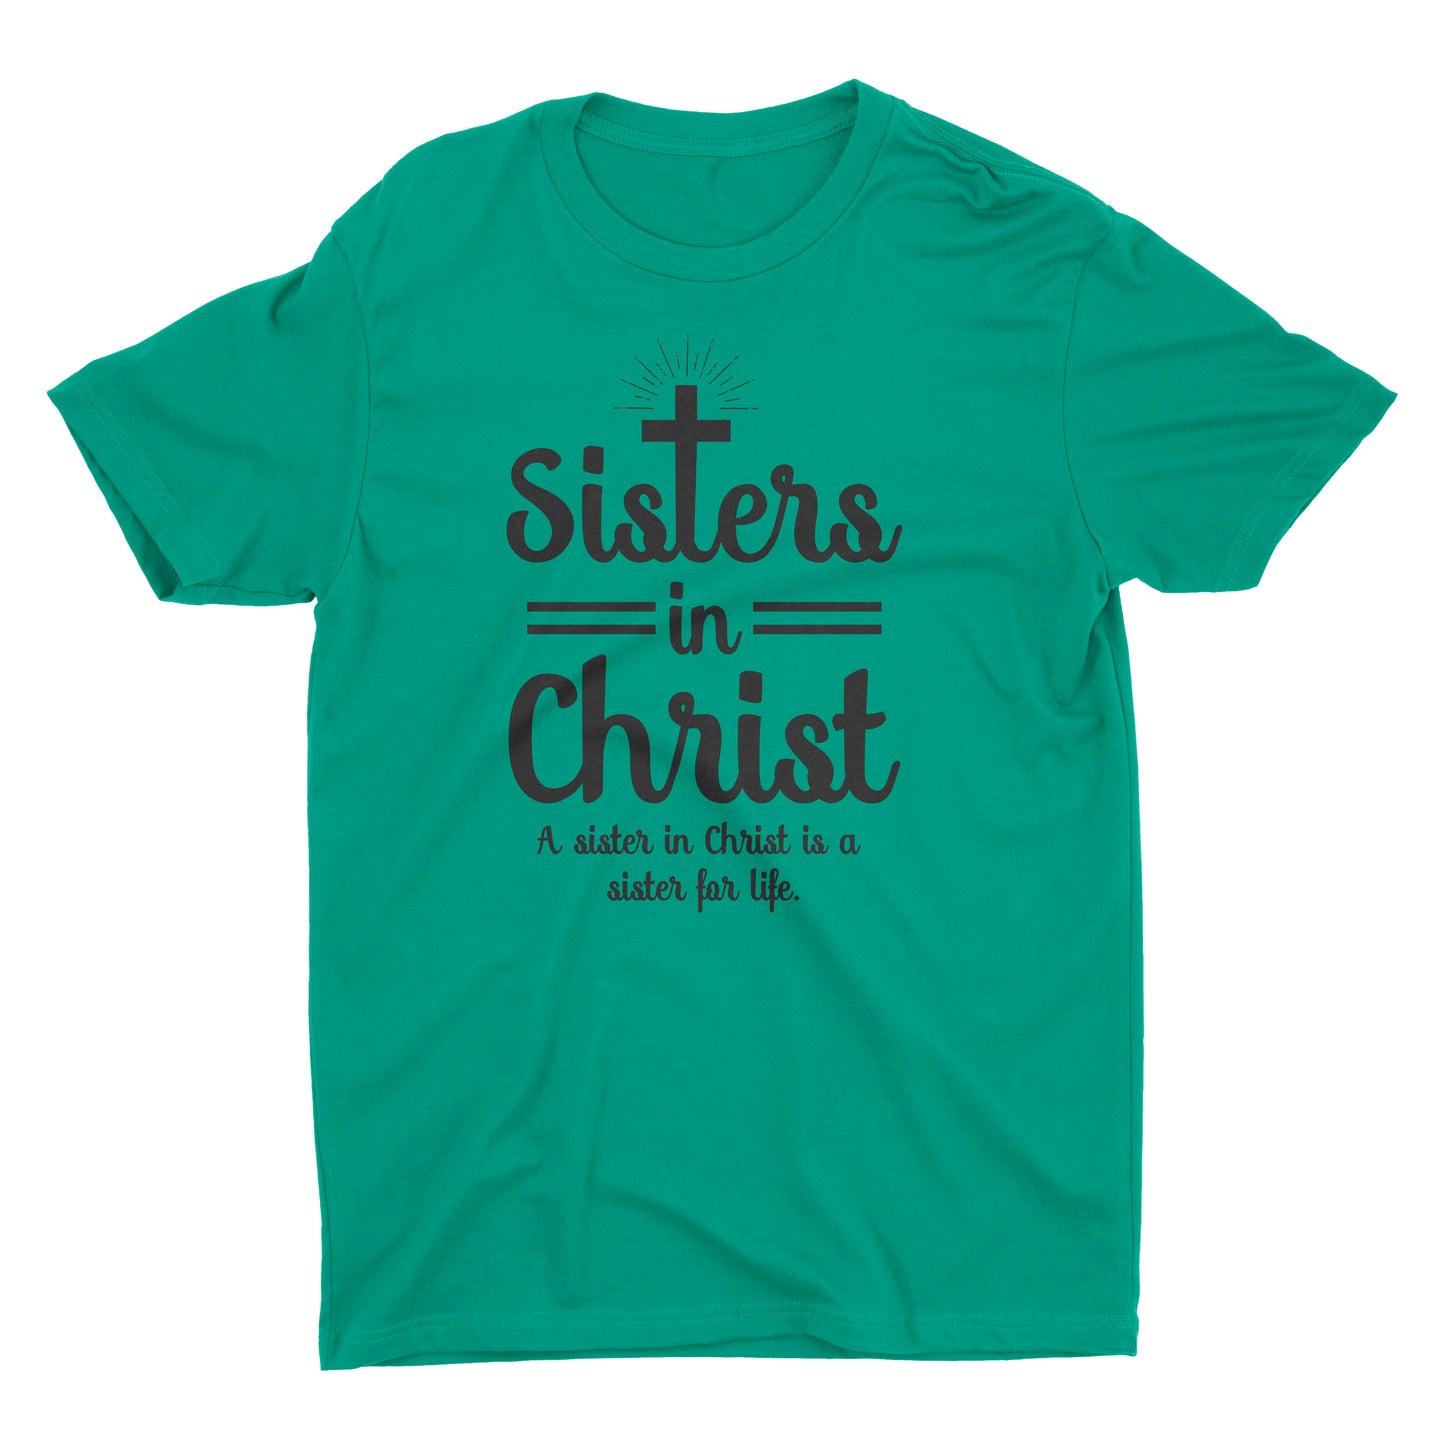 Sisters In Christ (St. Patrick's Day Edition)